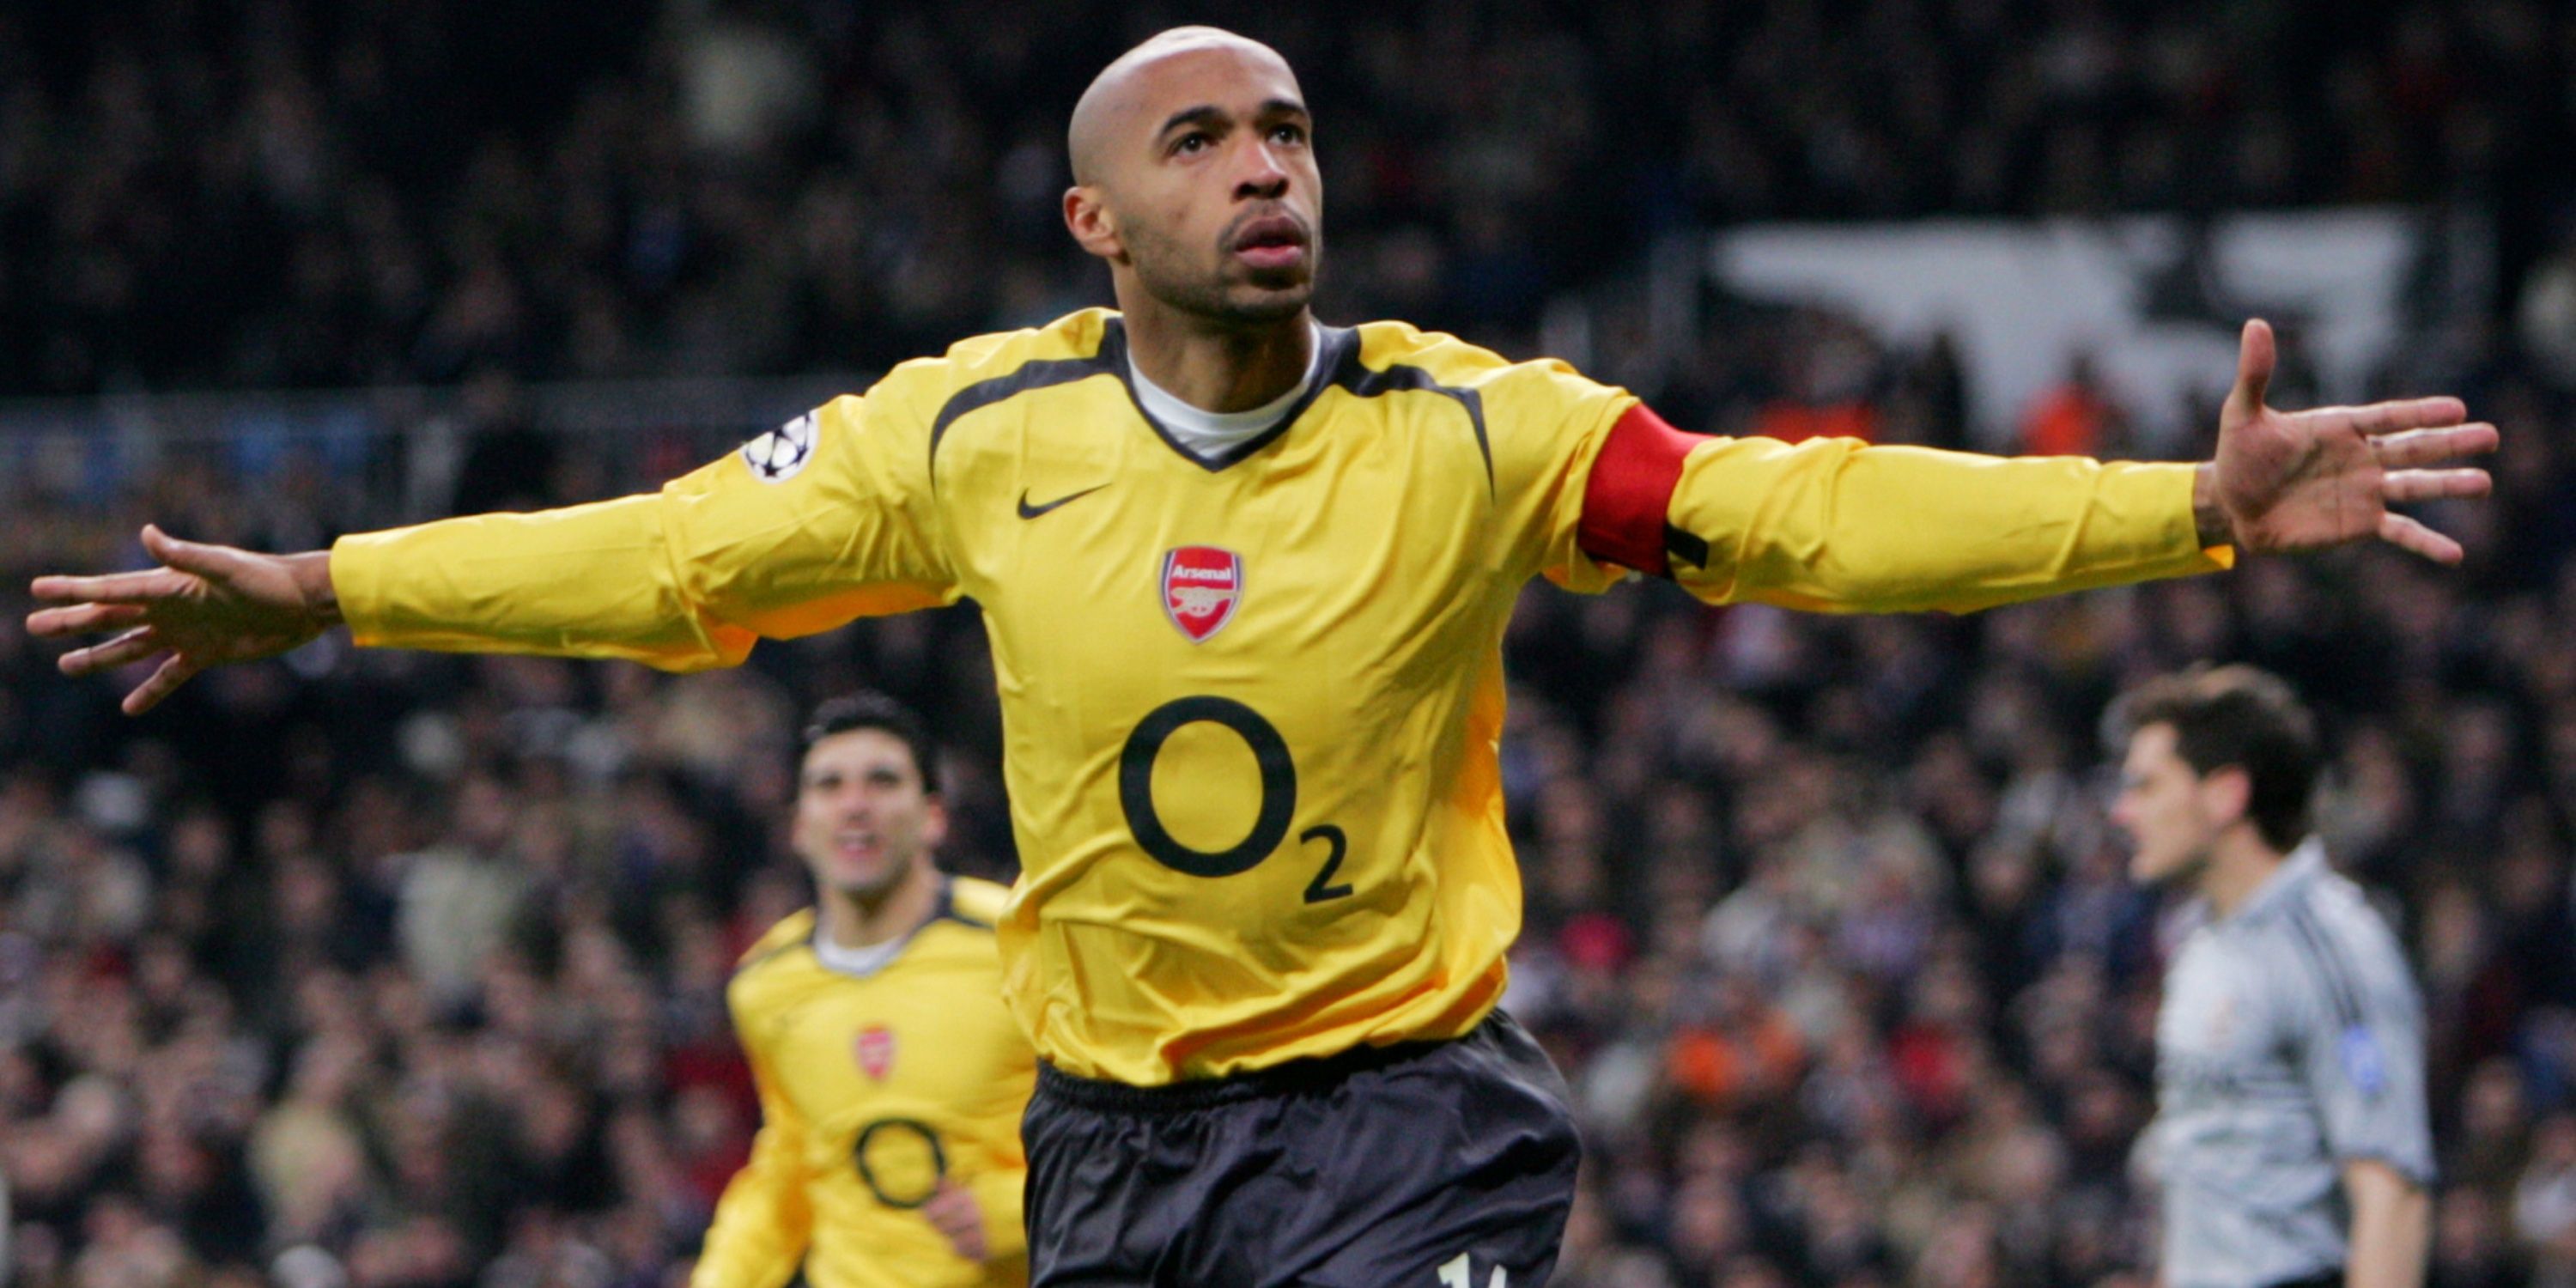 Thierry Henry celebrates scoring against Real Madrid for Arsenal